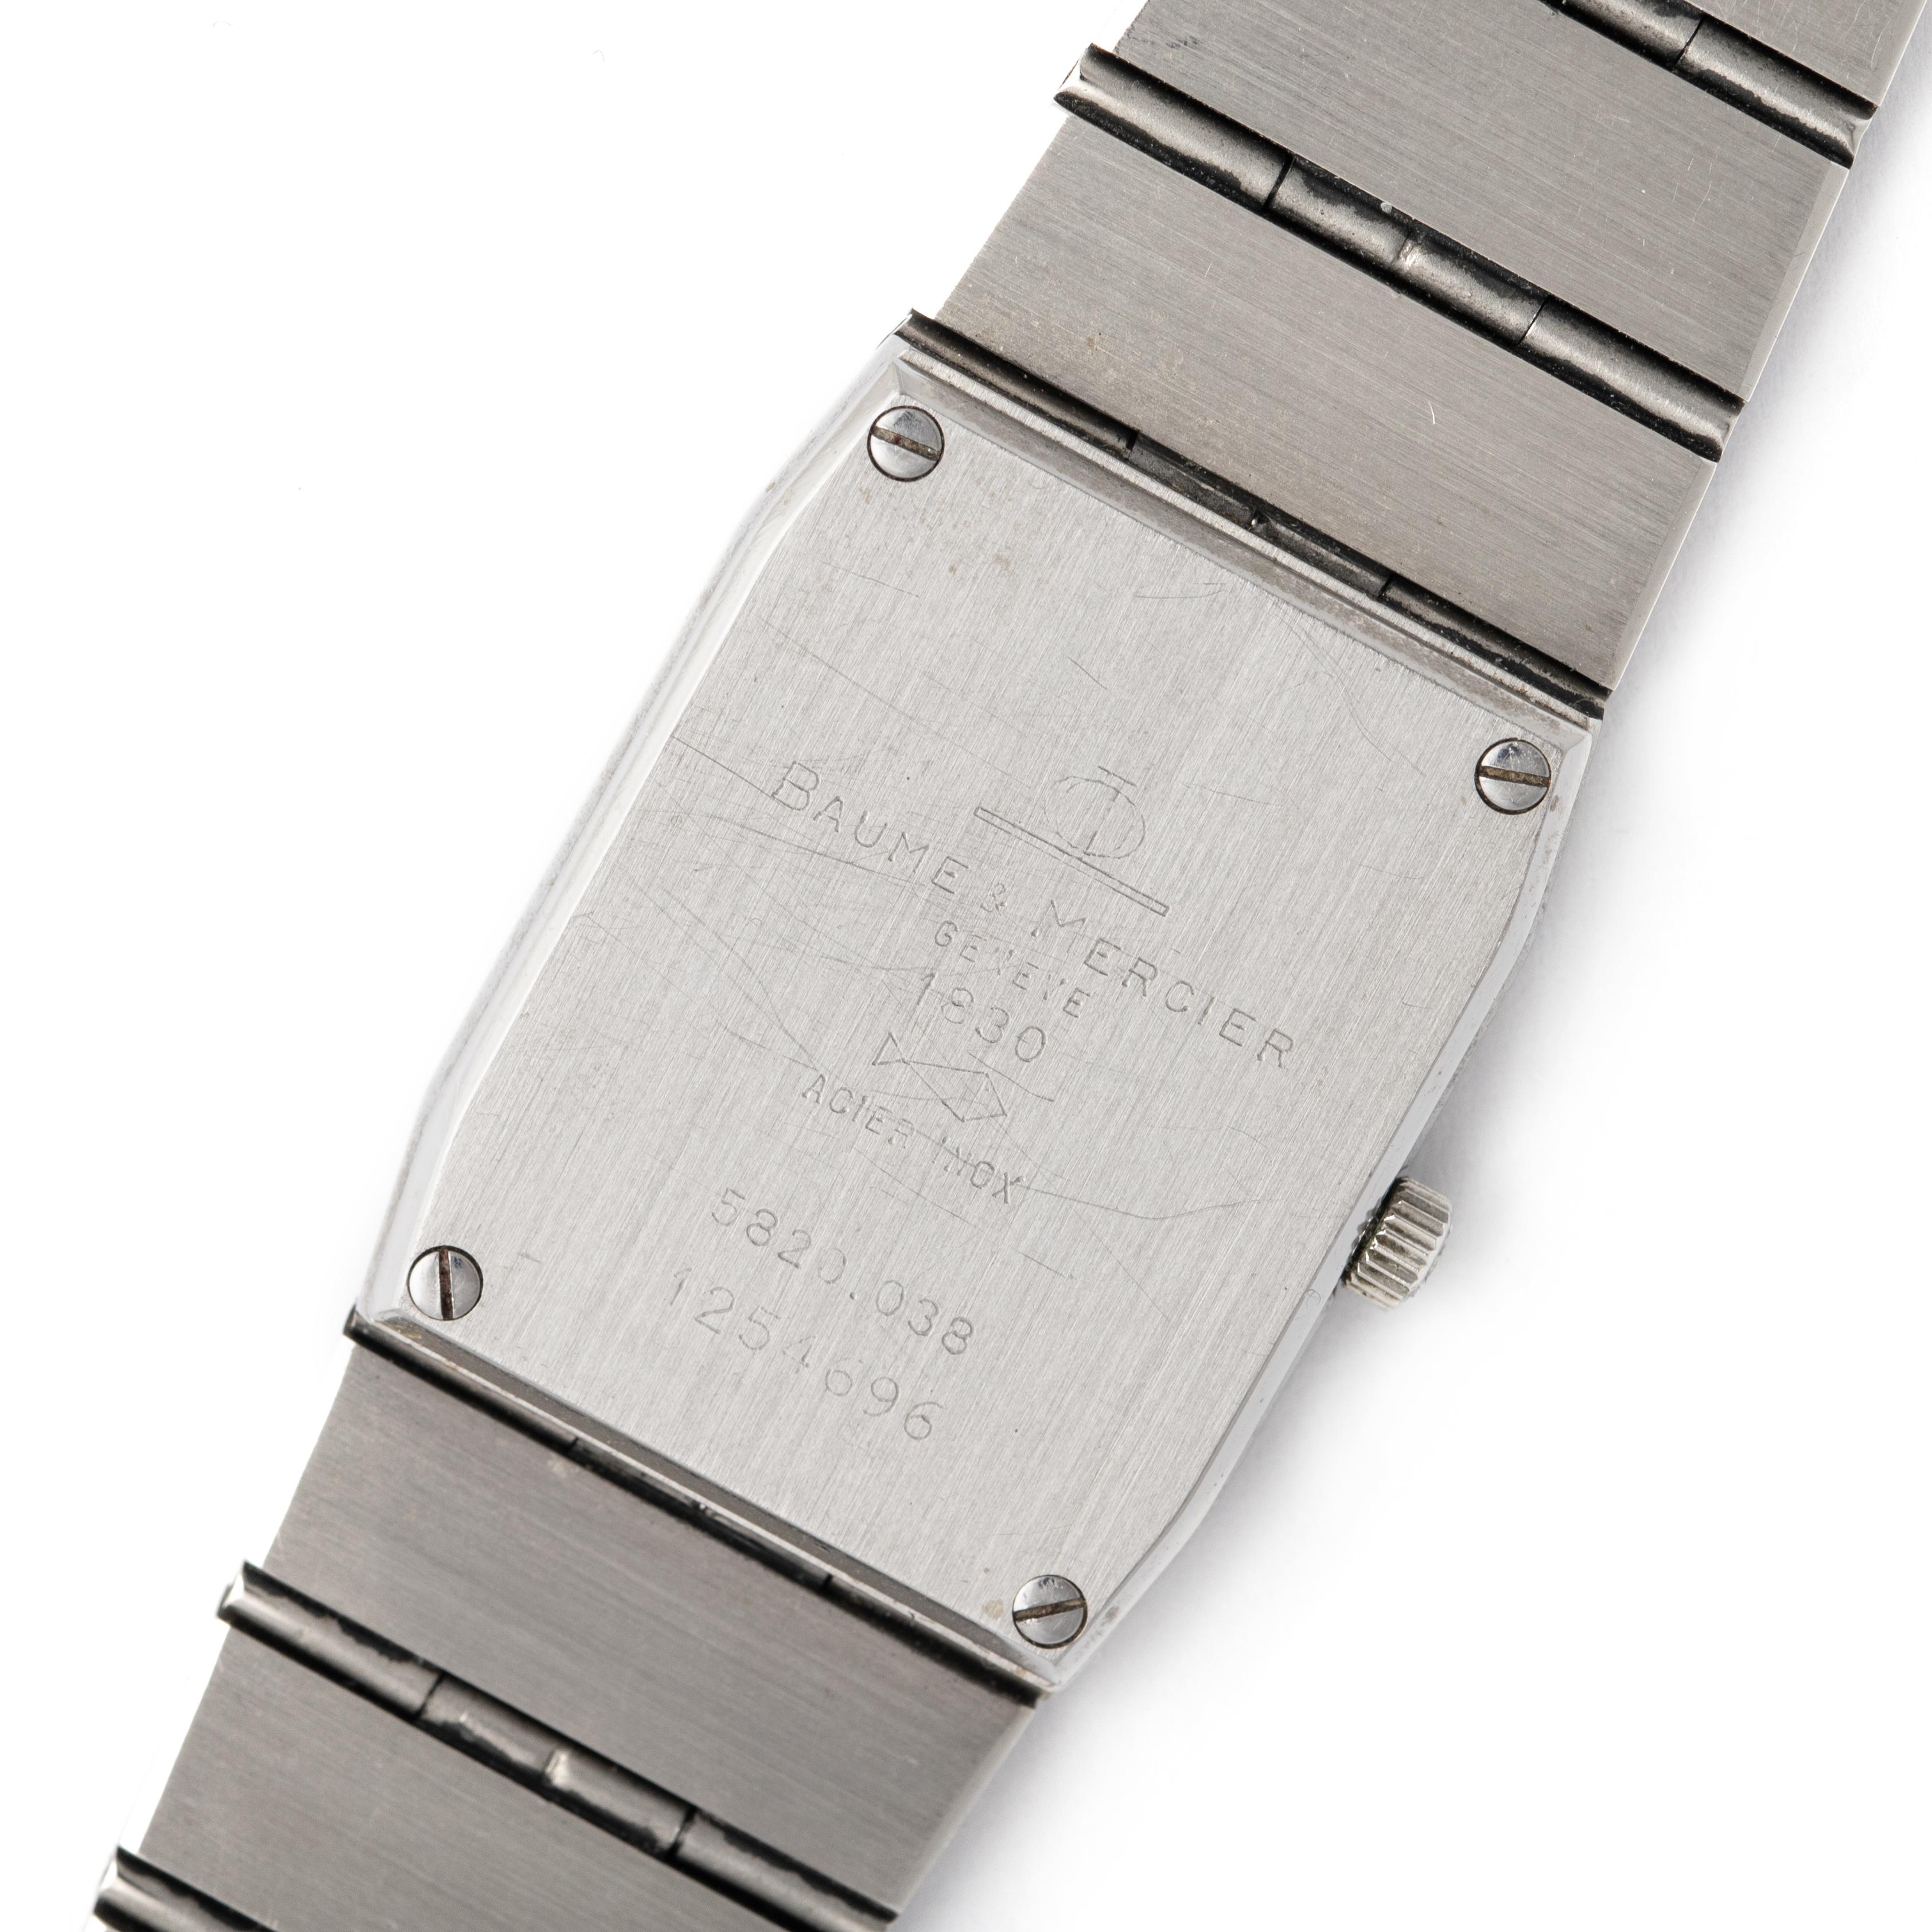 Baume & Mercier Classique Monte Carlo Stainless Steel Wristwatch In Fair Condition For Sale In Geneva, CH